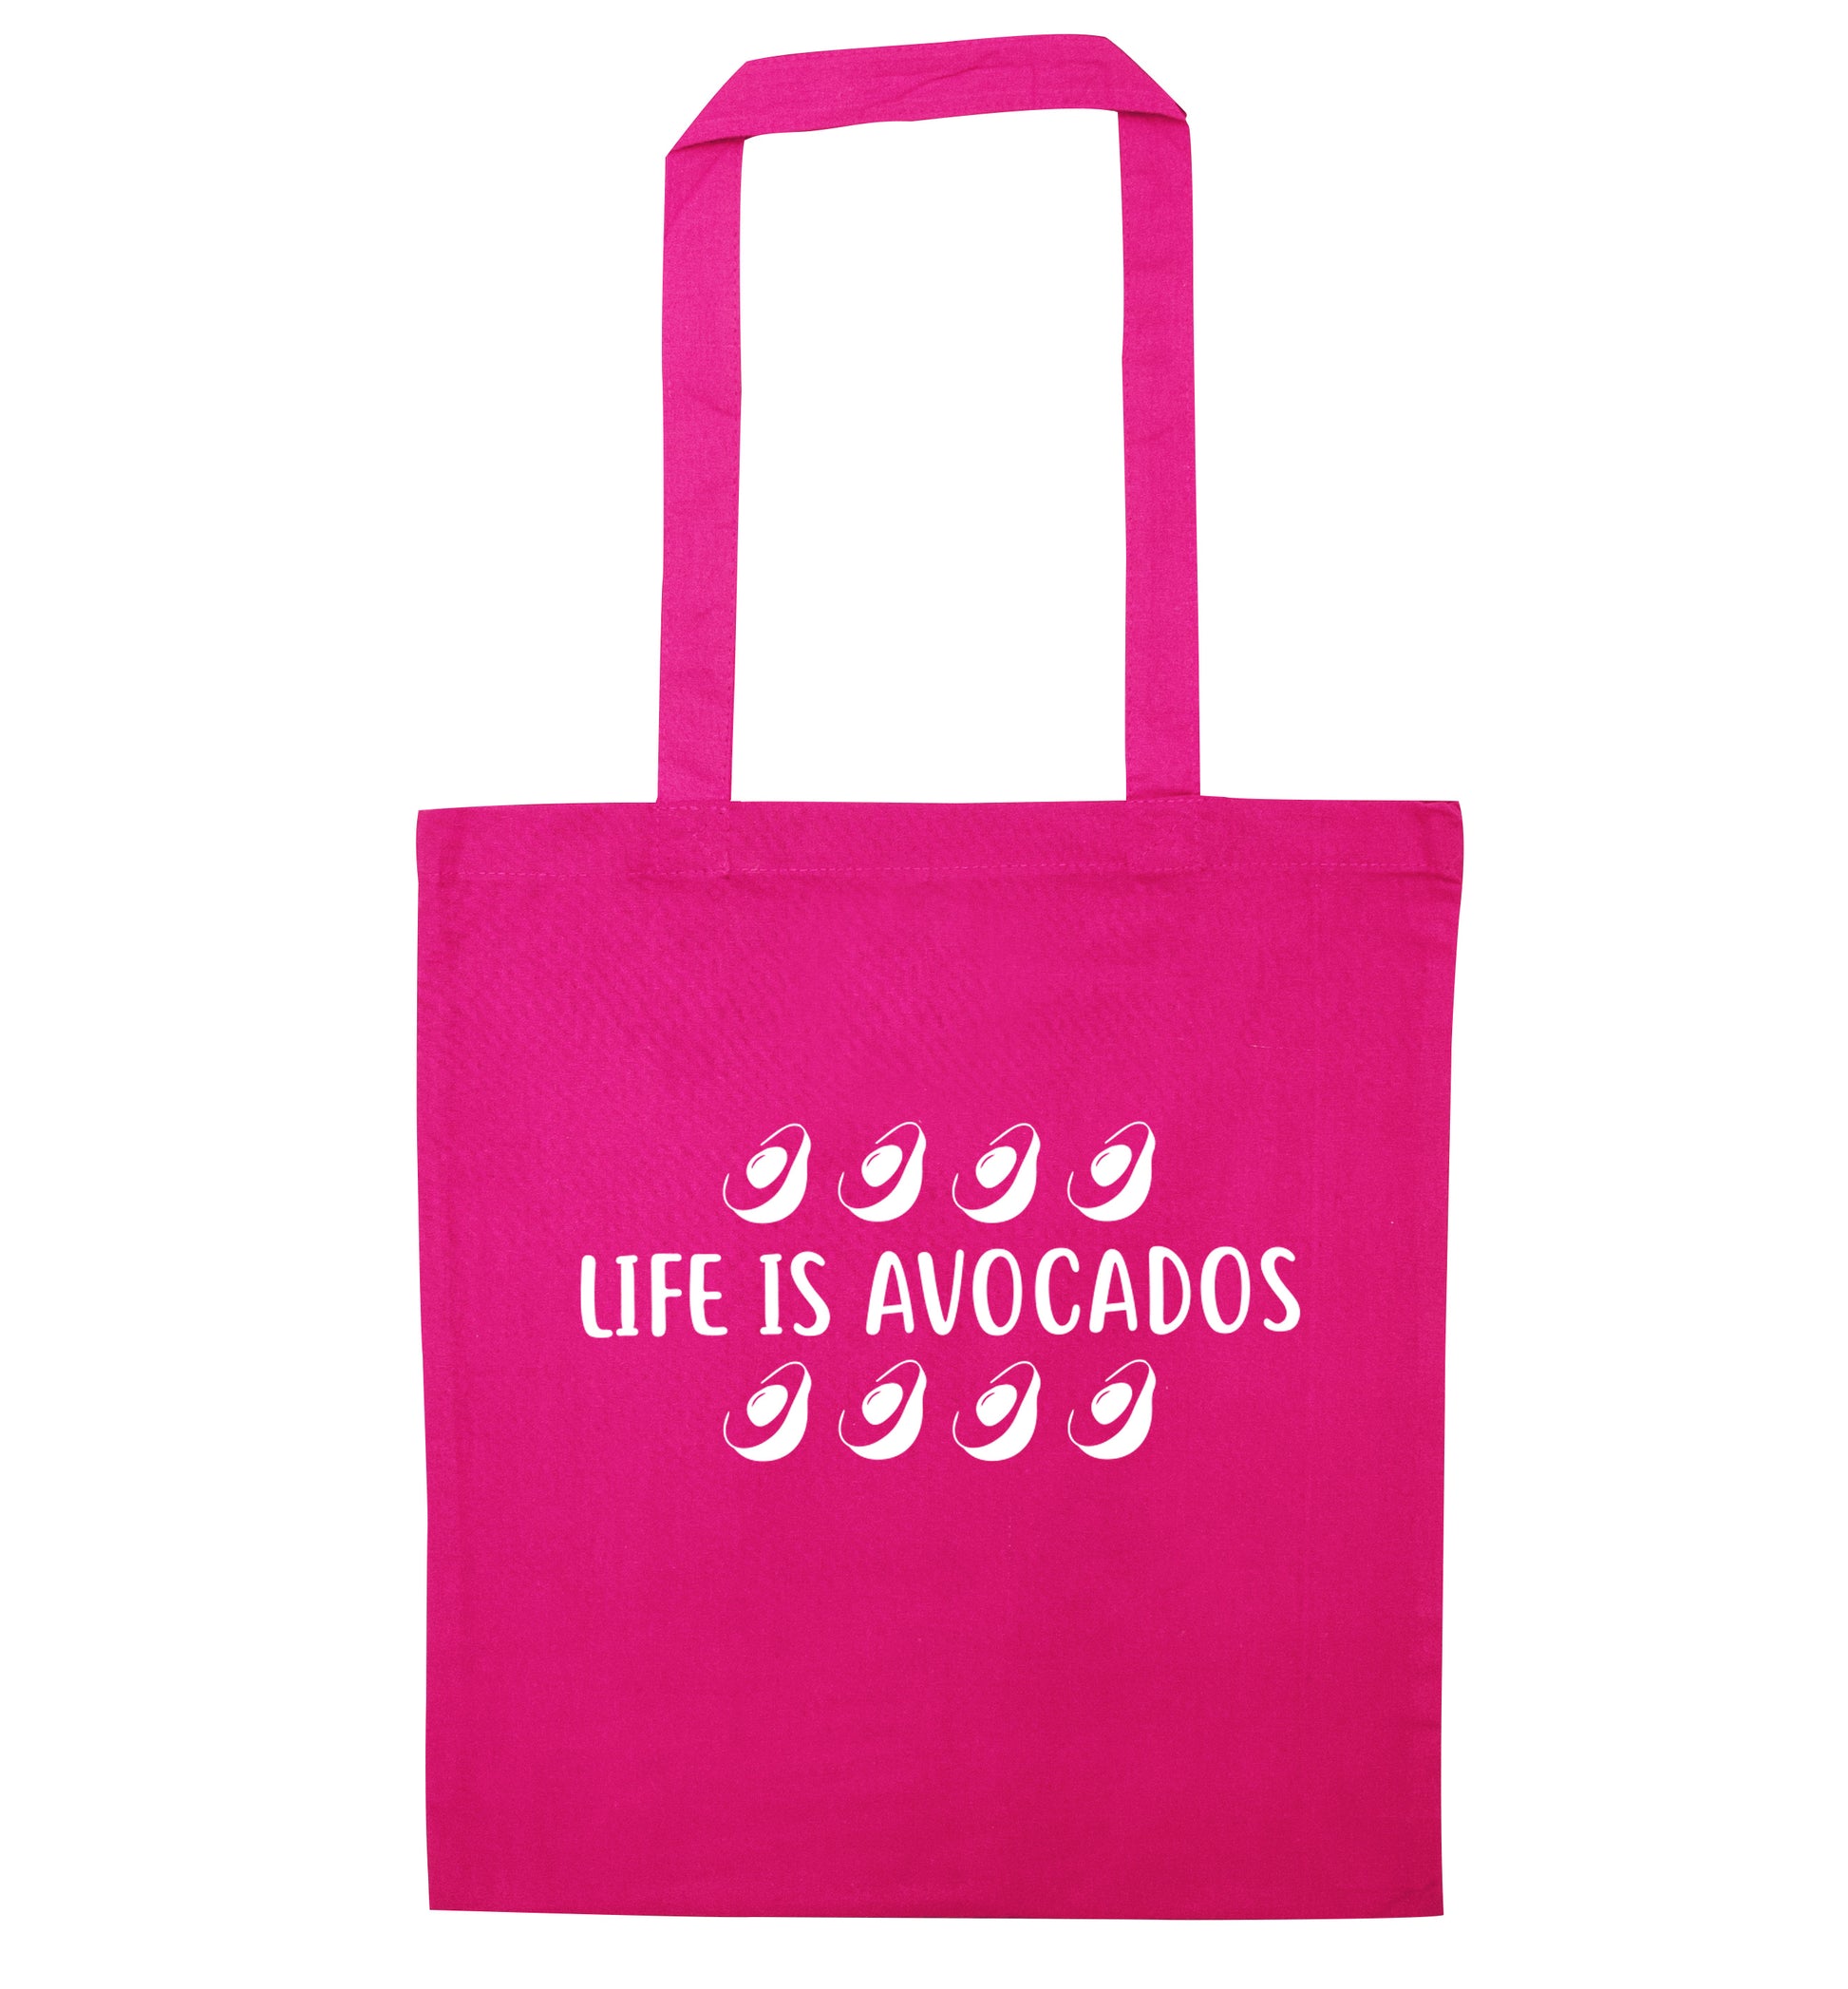 Life is avocados pink tote bag